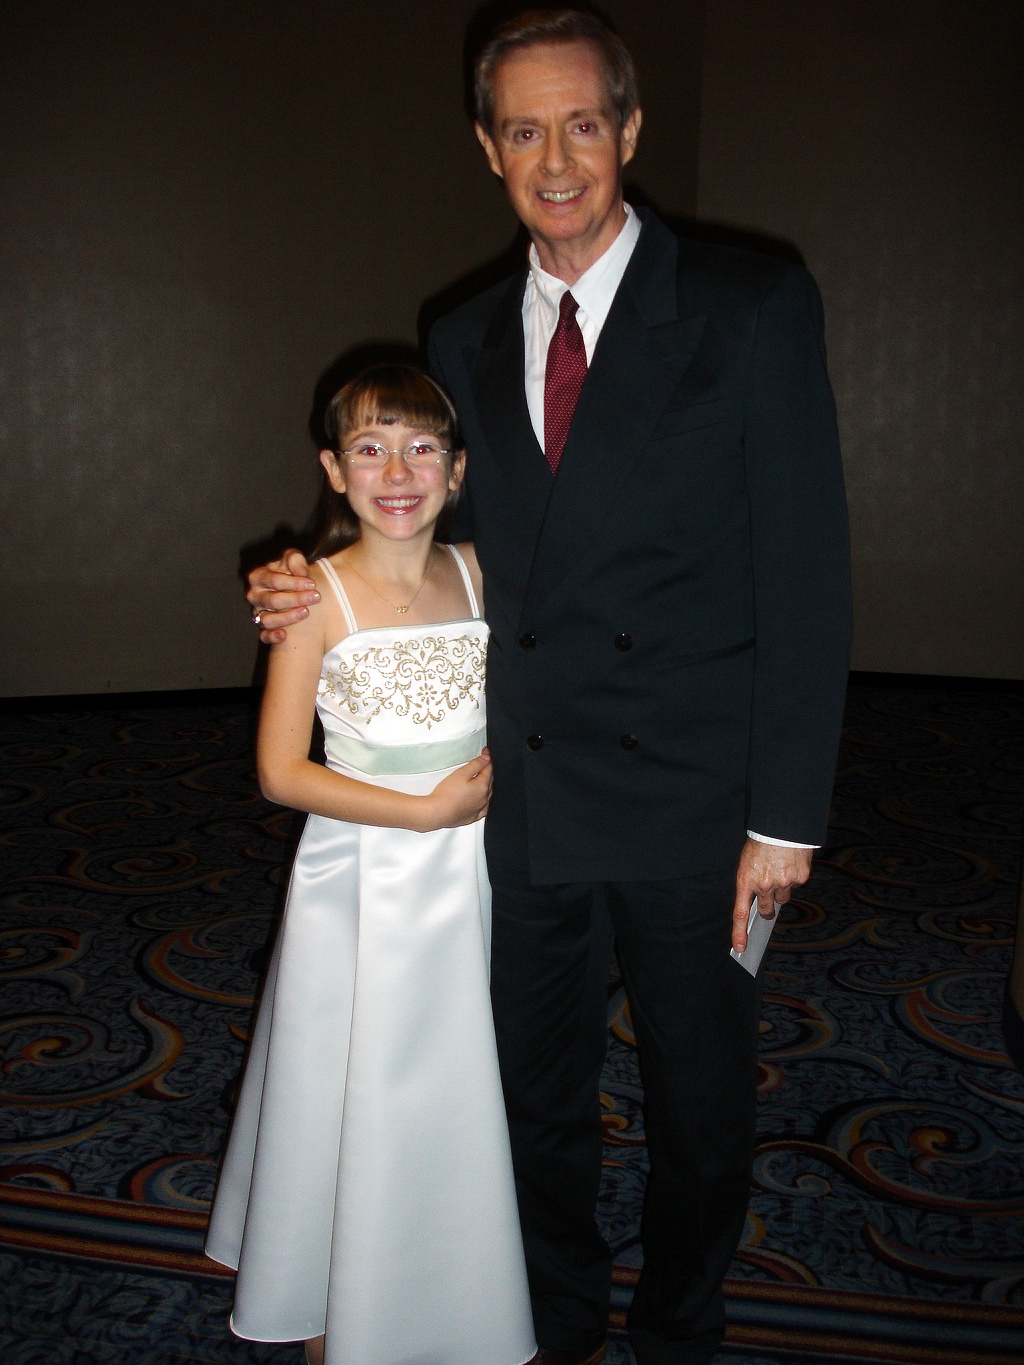 Melody with Randy Skinner at the Broadway opening night party for 